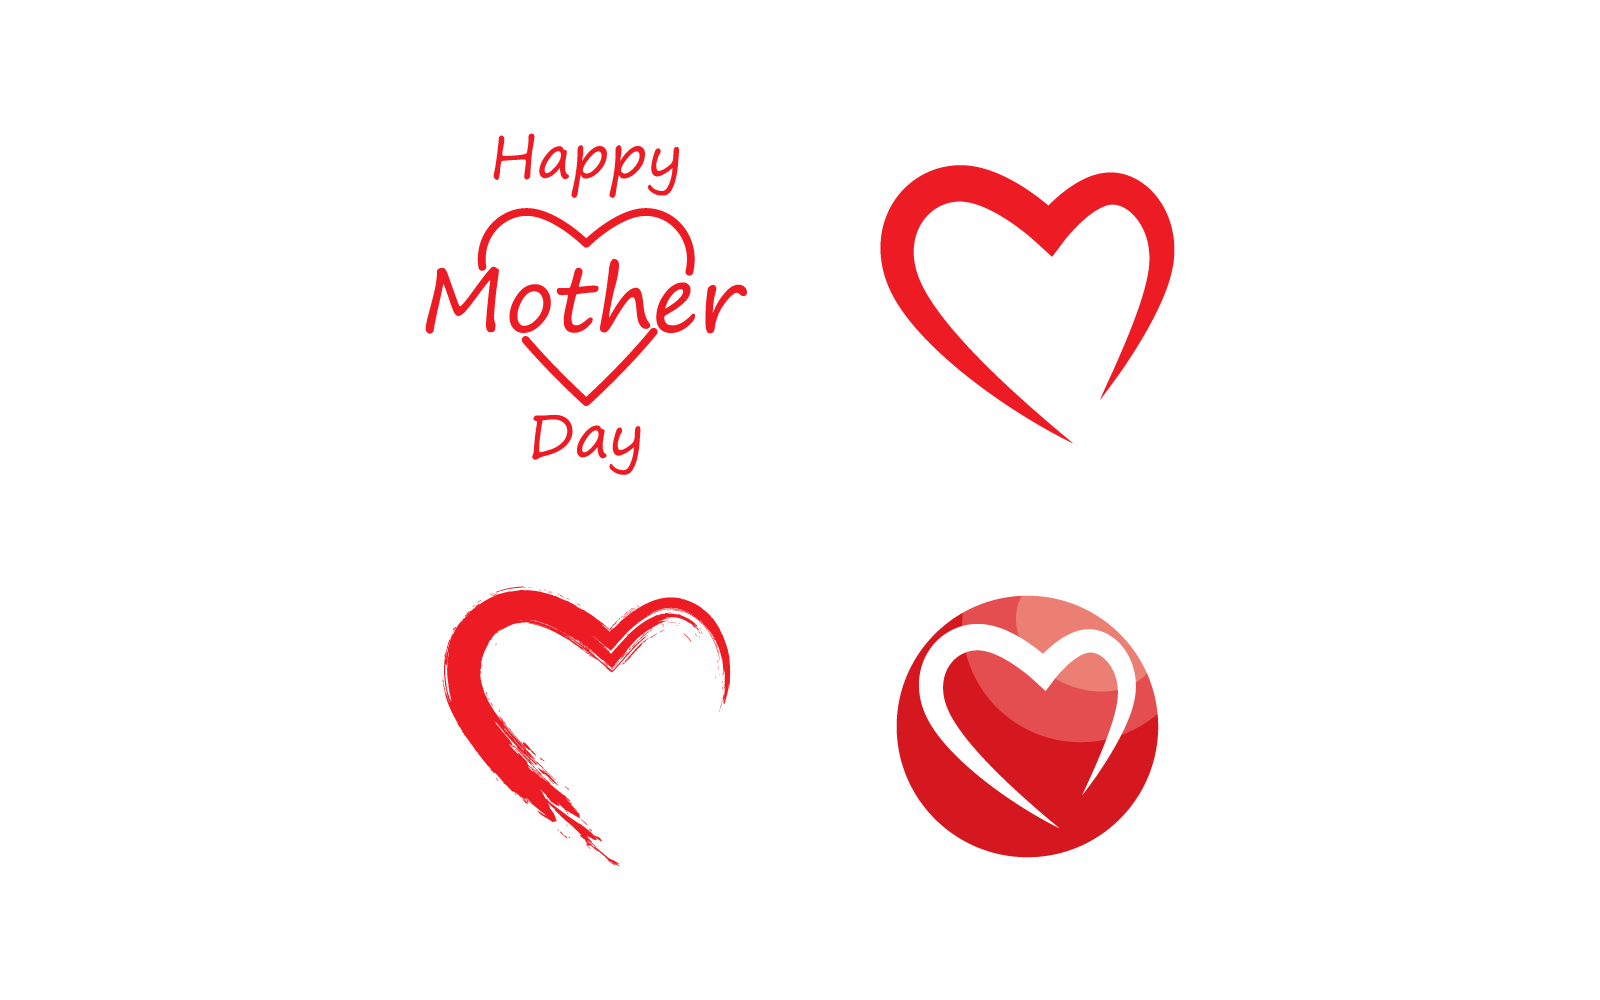 Happy mother's day postcard or logo illustration template